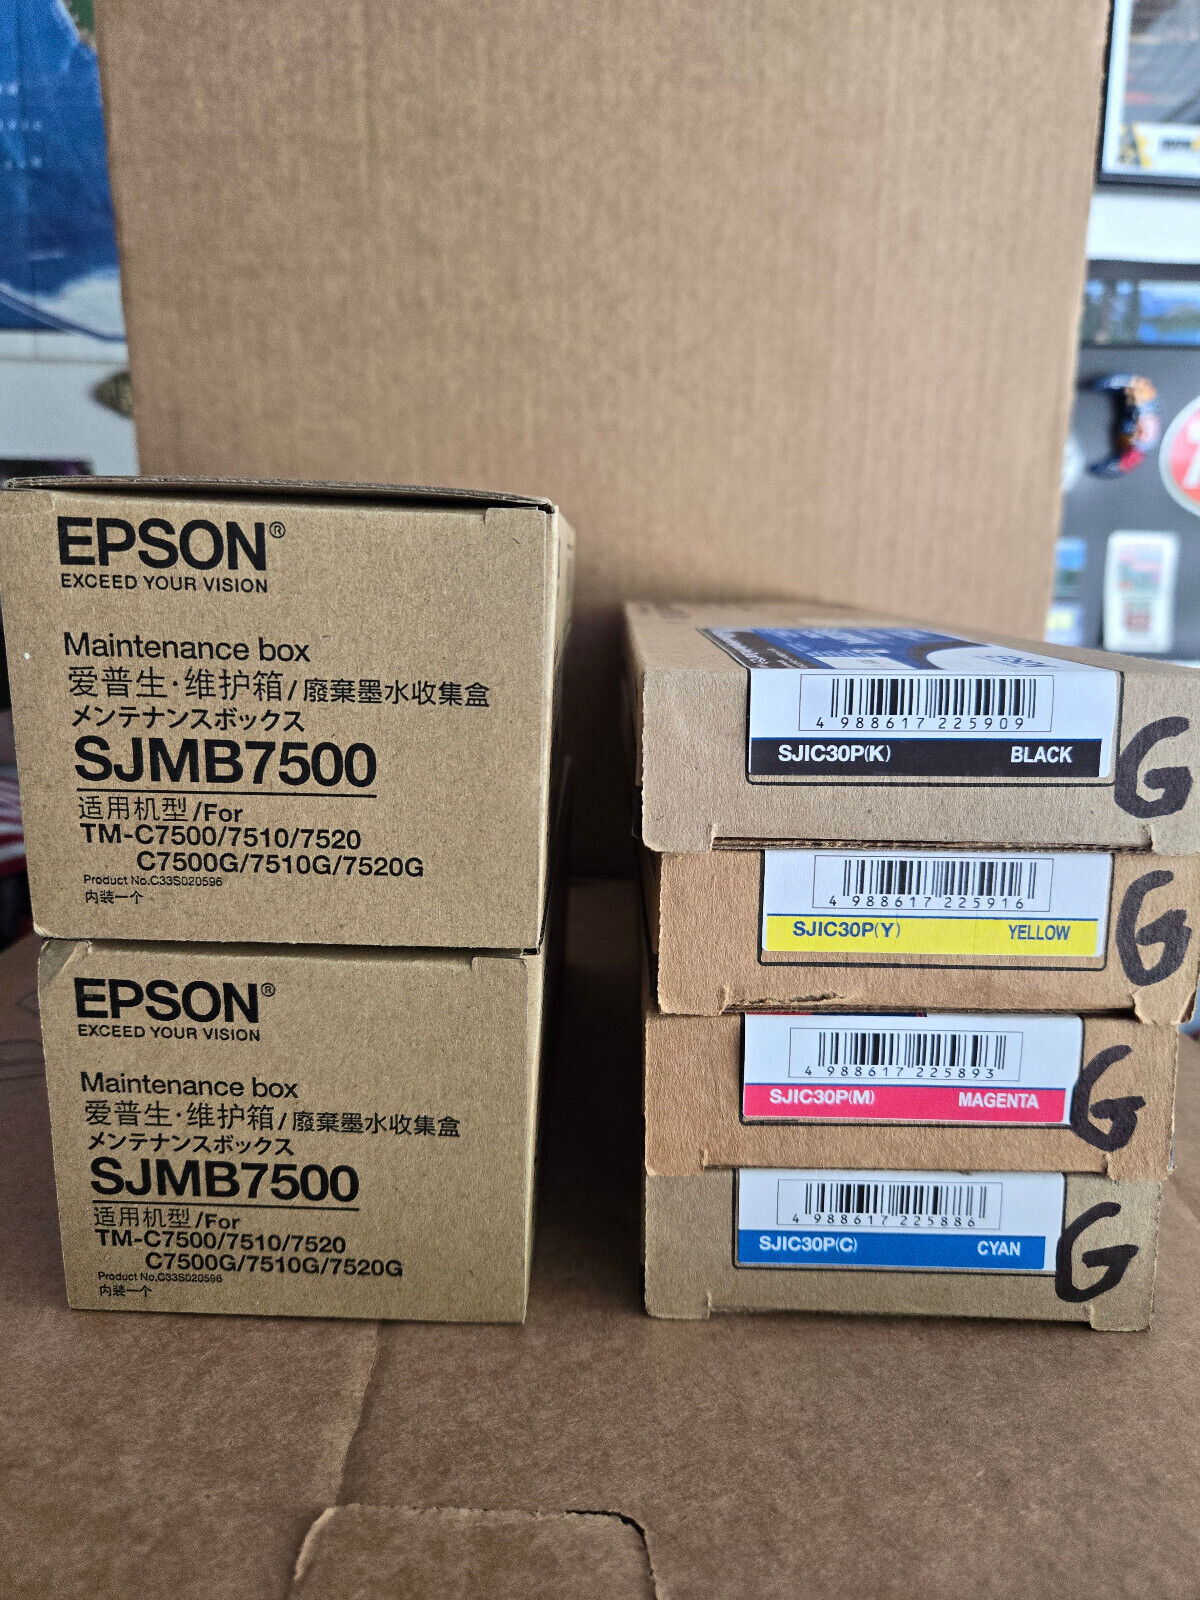 Epson C7500G Ink Set 4 CYMK (for GLOSSY printers), plus TWO waste boxes